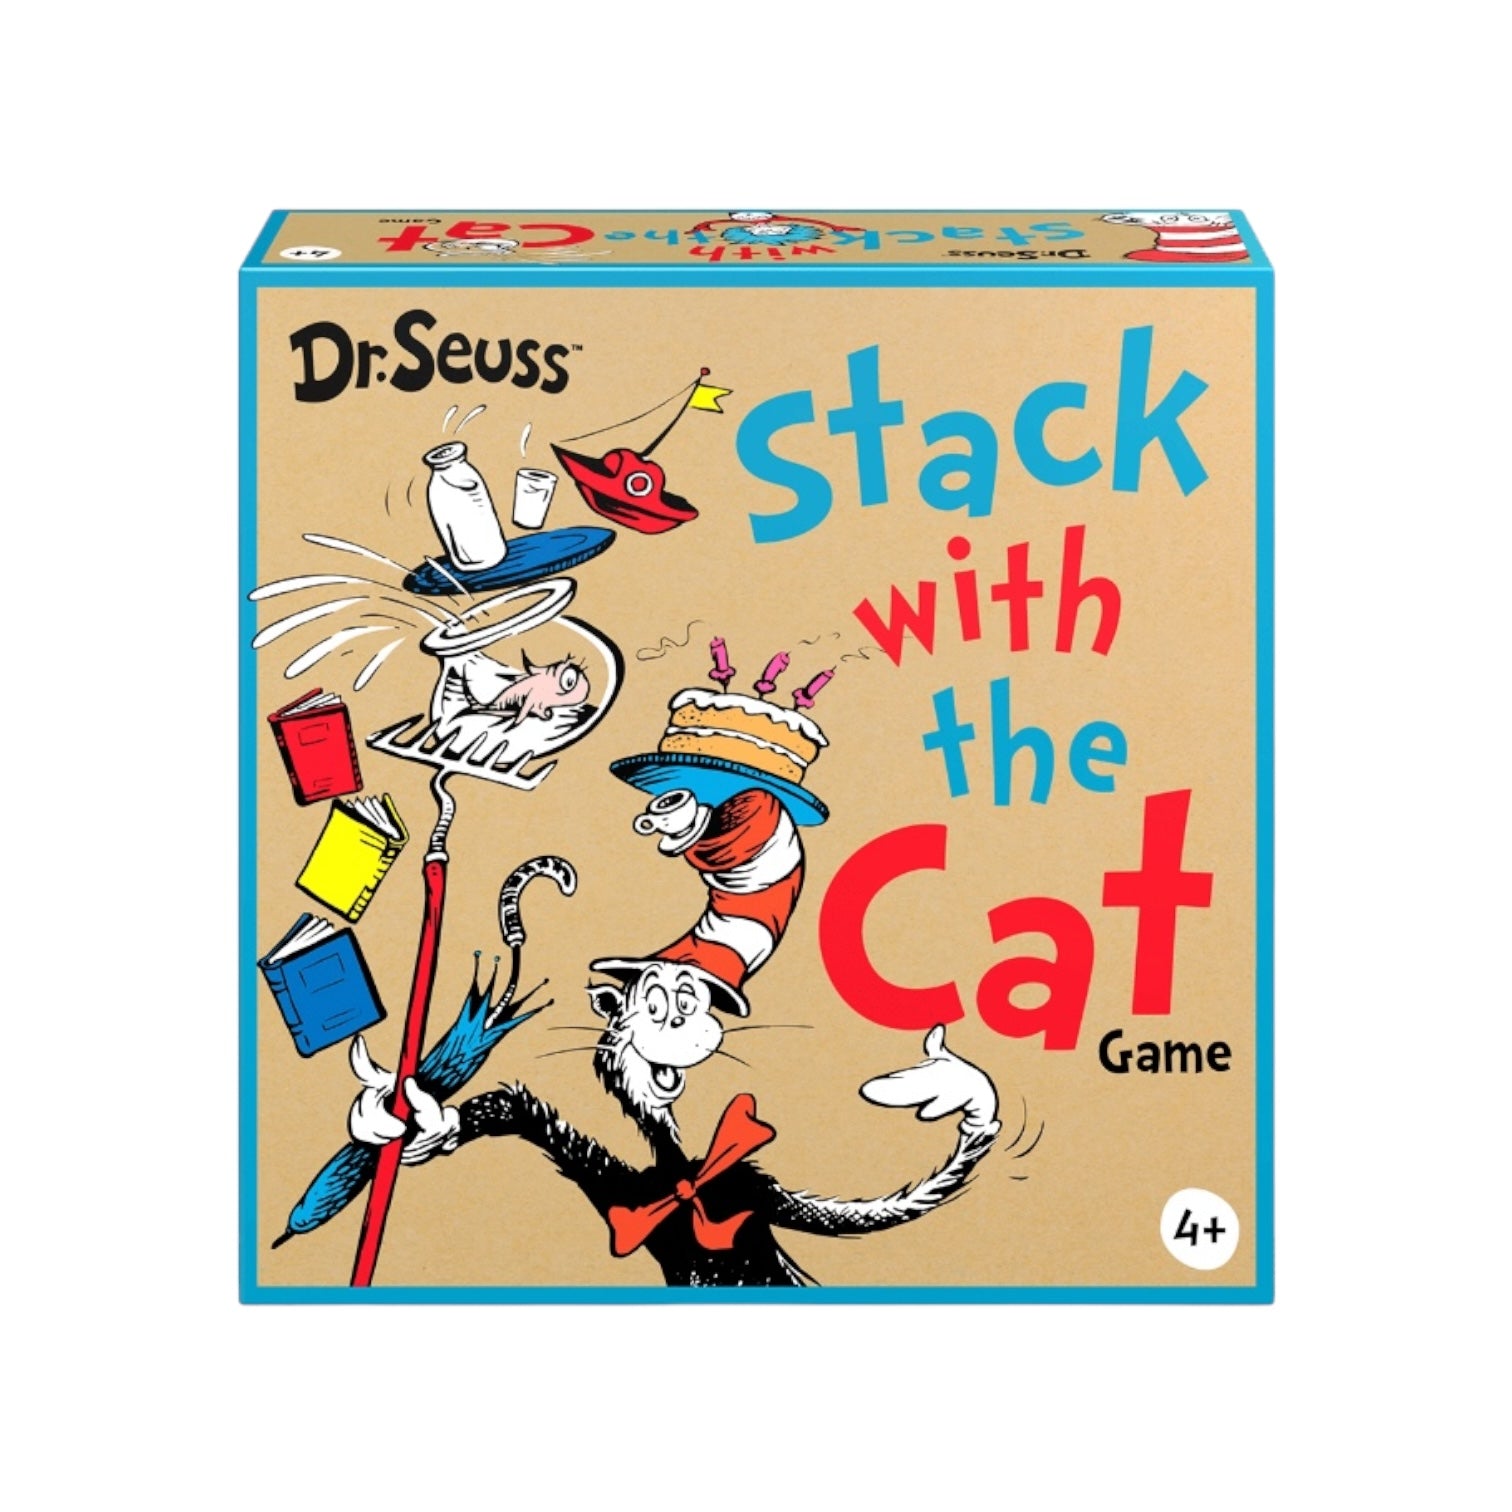 Stack with the Cat Funko Game - Dr Suess